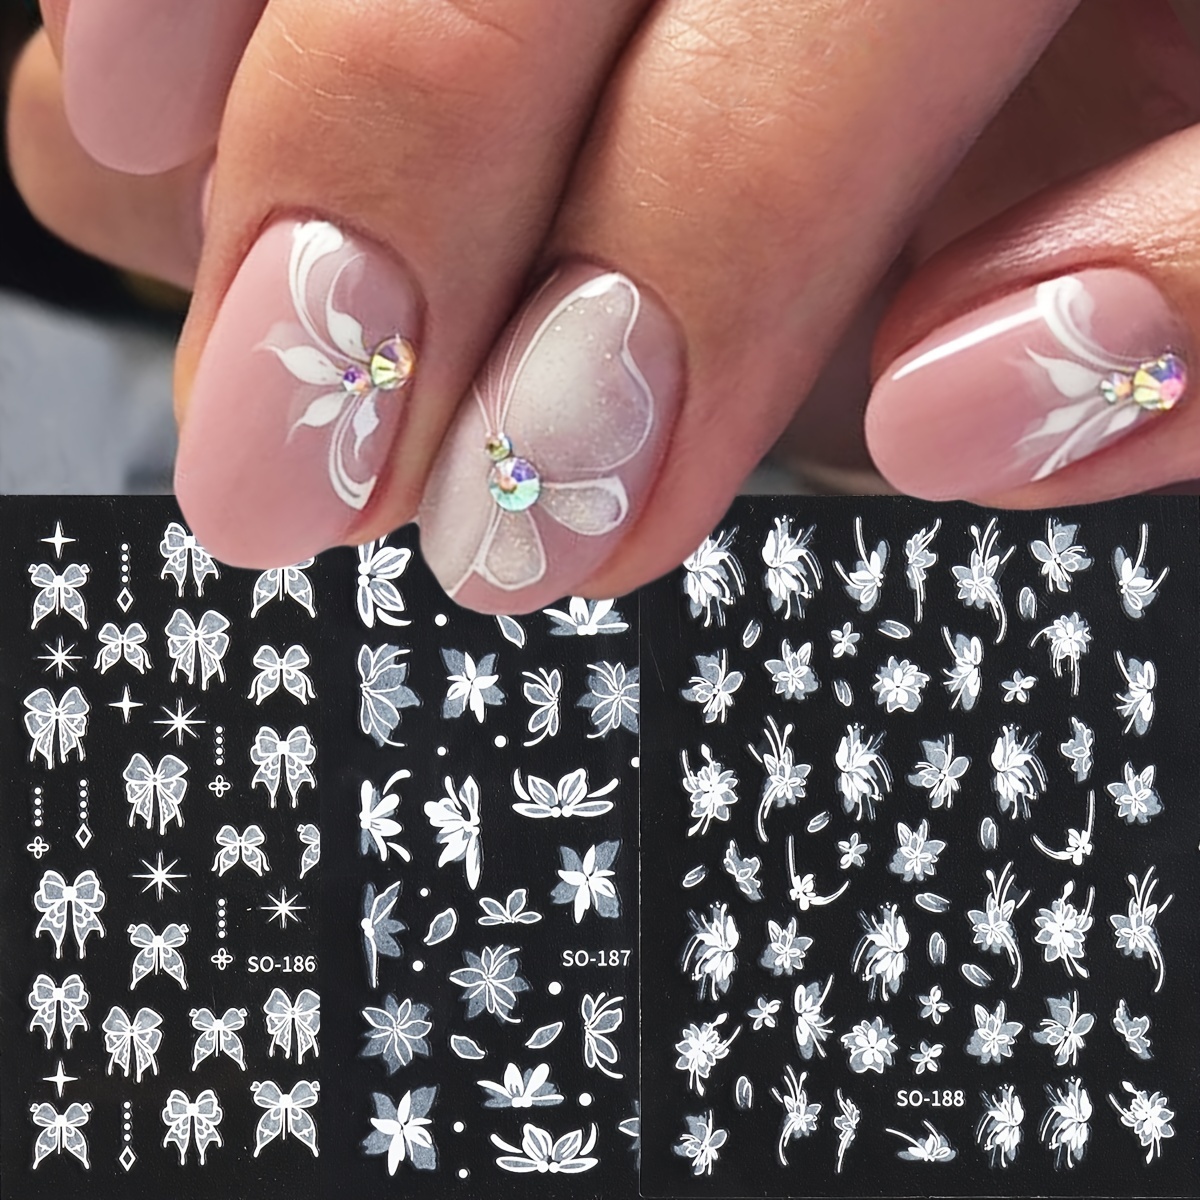 

White Black Flower Nail Art Stickers 2024 Spring Self-adhesive Nail Decals With Assorted Patterns Blossom Flower Art Design For Nails Design Manicure Decoration Accessories